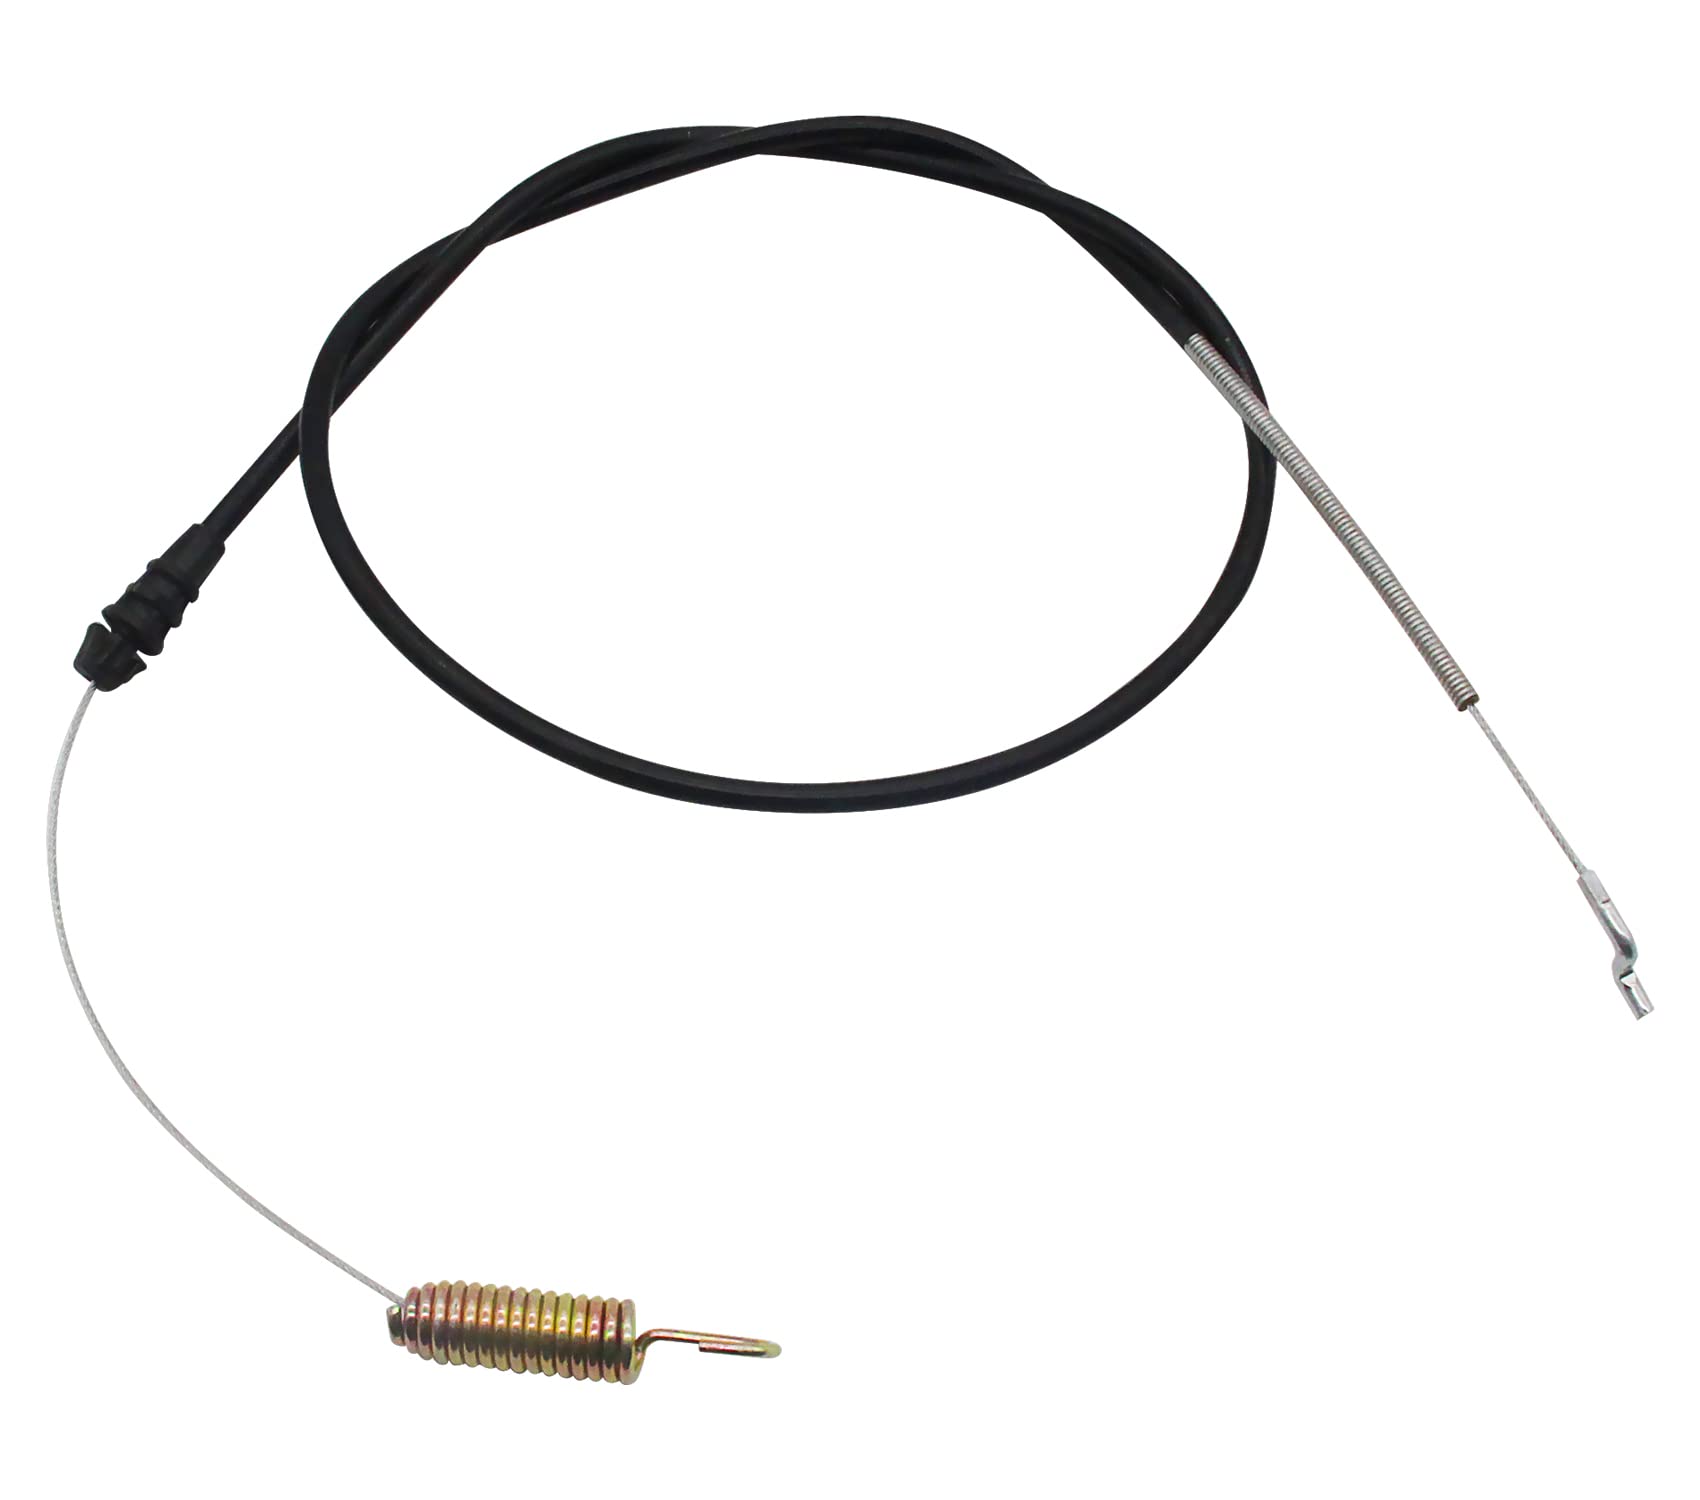 HAKATOP Replacement 105-1844 Traction Clutch Control Cable for Toro Rear Drive Propelled 22" Recycler Walk Behind Push Lawn Mower